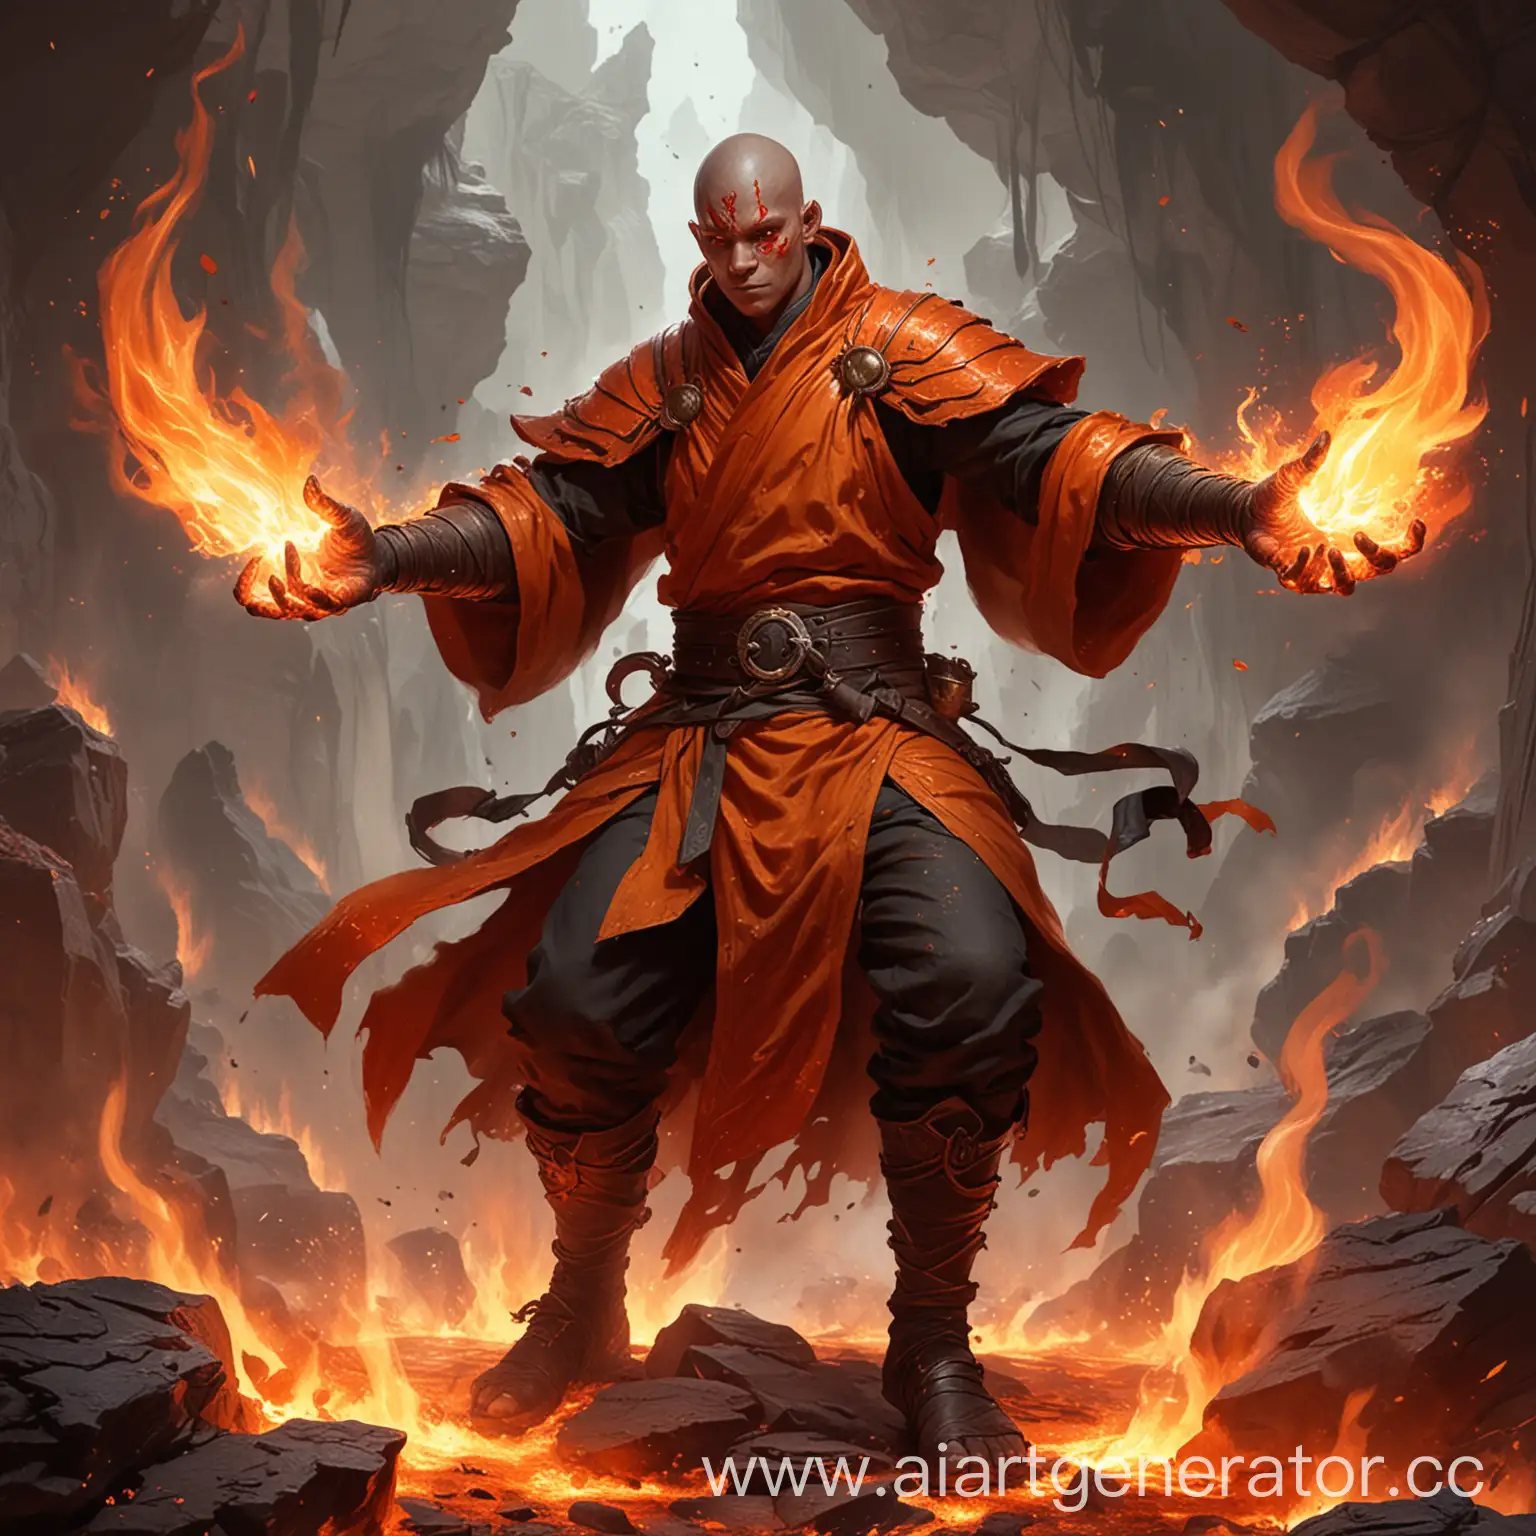 Monk-Sorcerer-Battling-with-Fiery-Magma-Hands